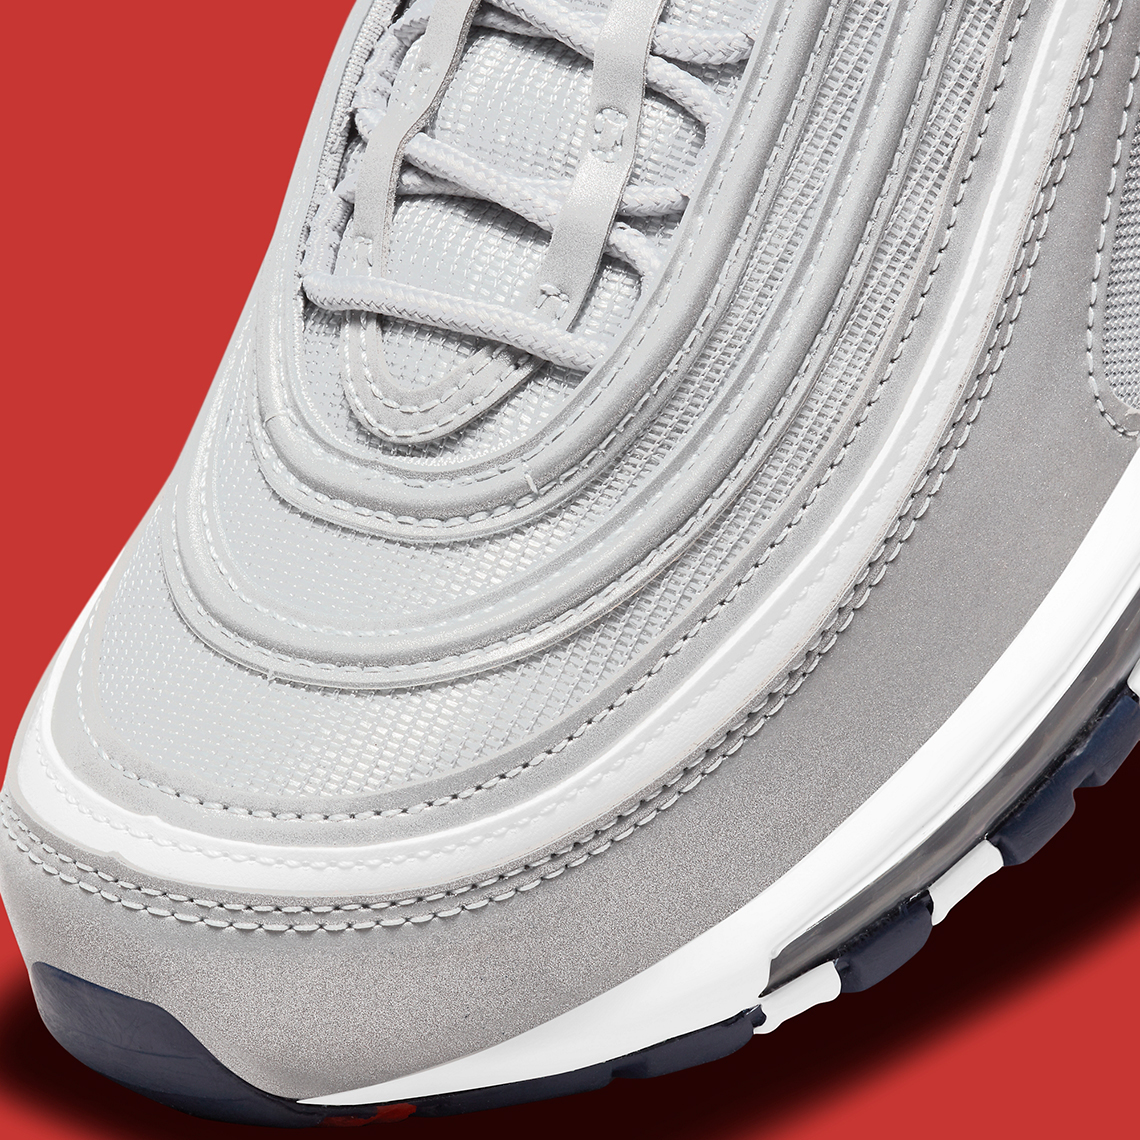 Nike Air Max 97 Puerto Rico Release Reminder 3